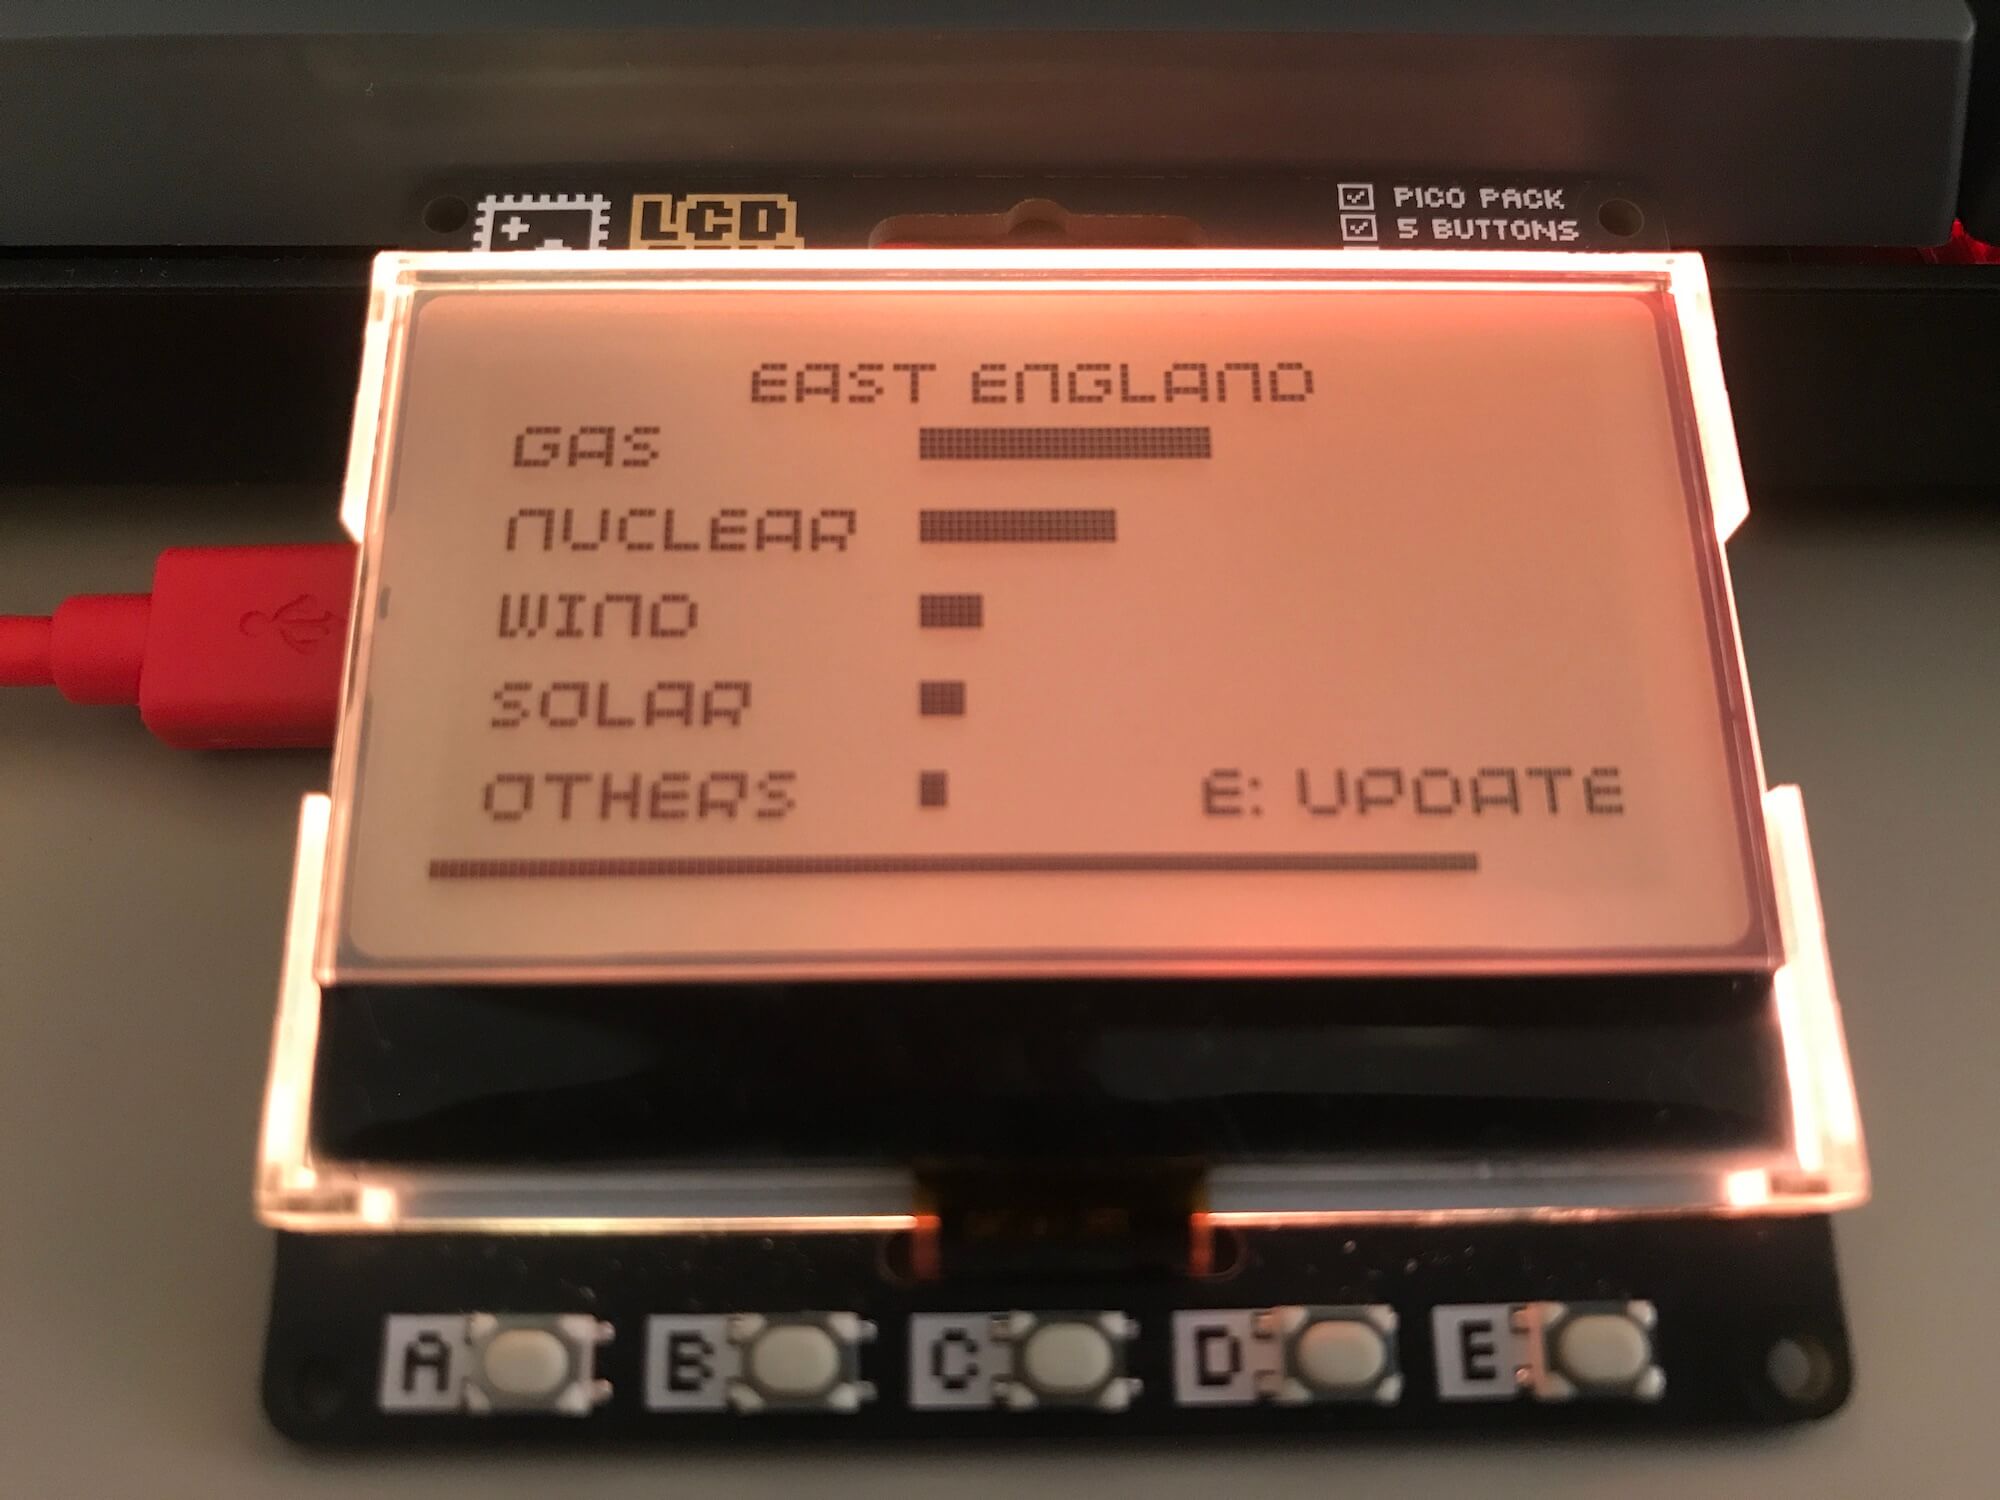 Gas and Nuclear in East England - orange, starting to get concerning!